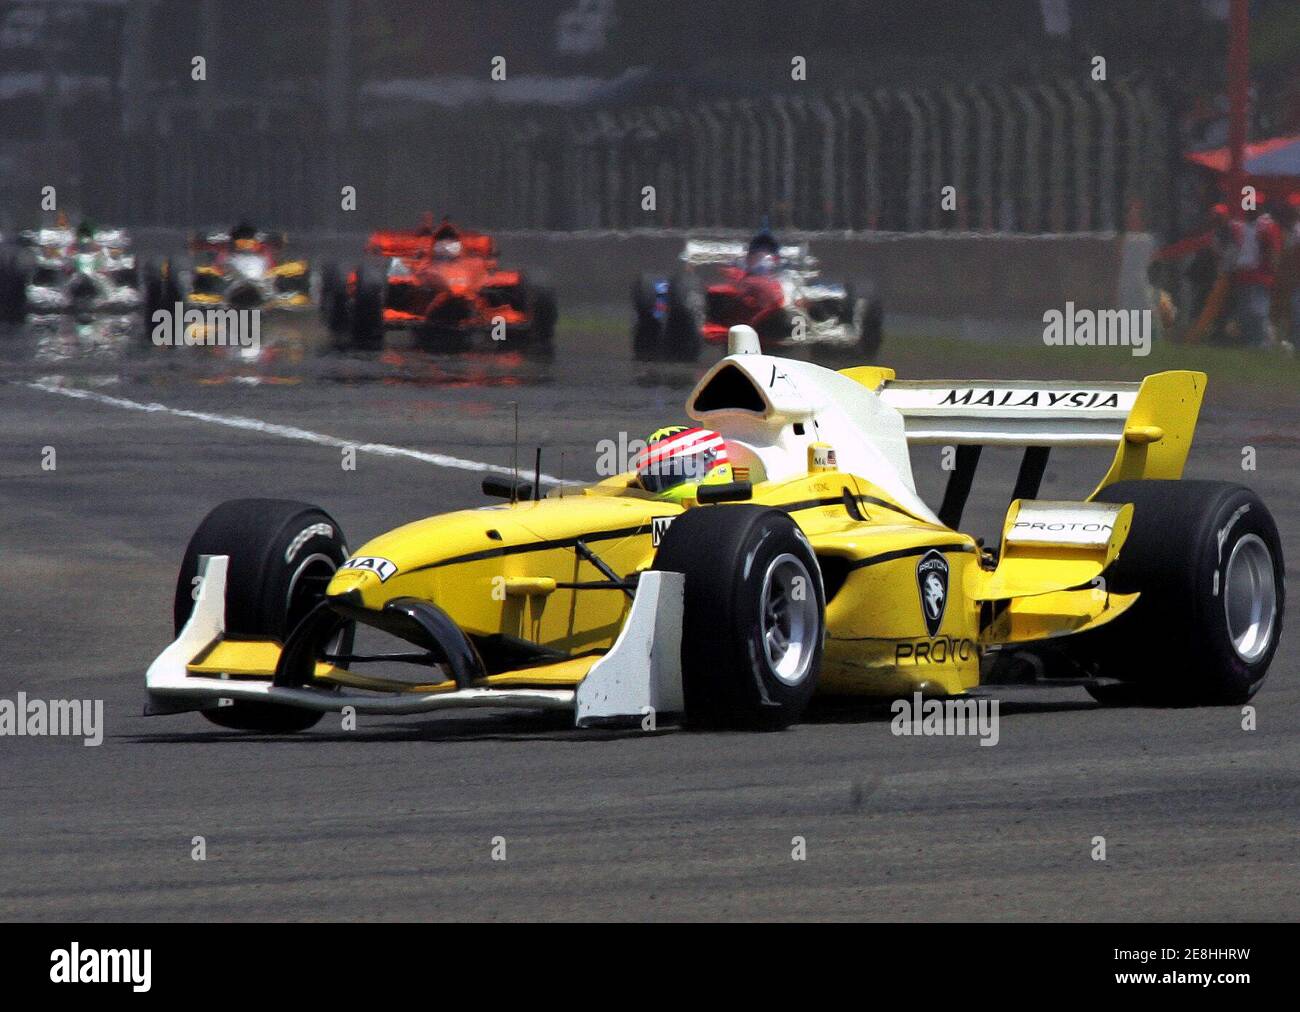 Malaysia's Alex Yoong drives his car during the feature race of the A1 Grand Prix Championship at the Sentul circuit in Bogor, West Java province, Indonesia February 12, 2006. Canada's Sean McIntosh won the feature race ahead of Yoong in second place and Australia's Marcus Marshall who finished third. REUTERS/Beawiharta Stock Photo